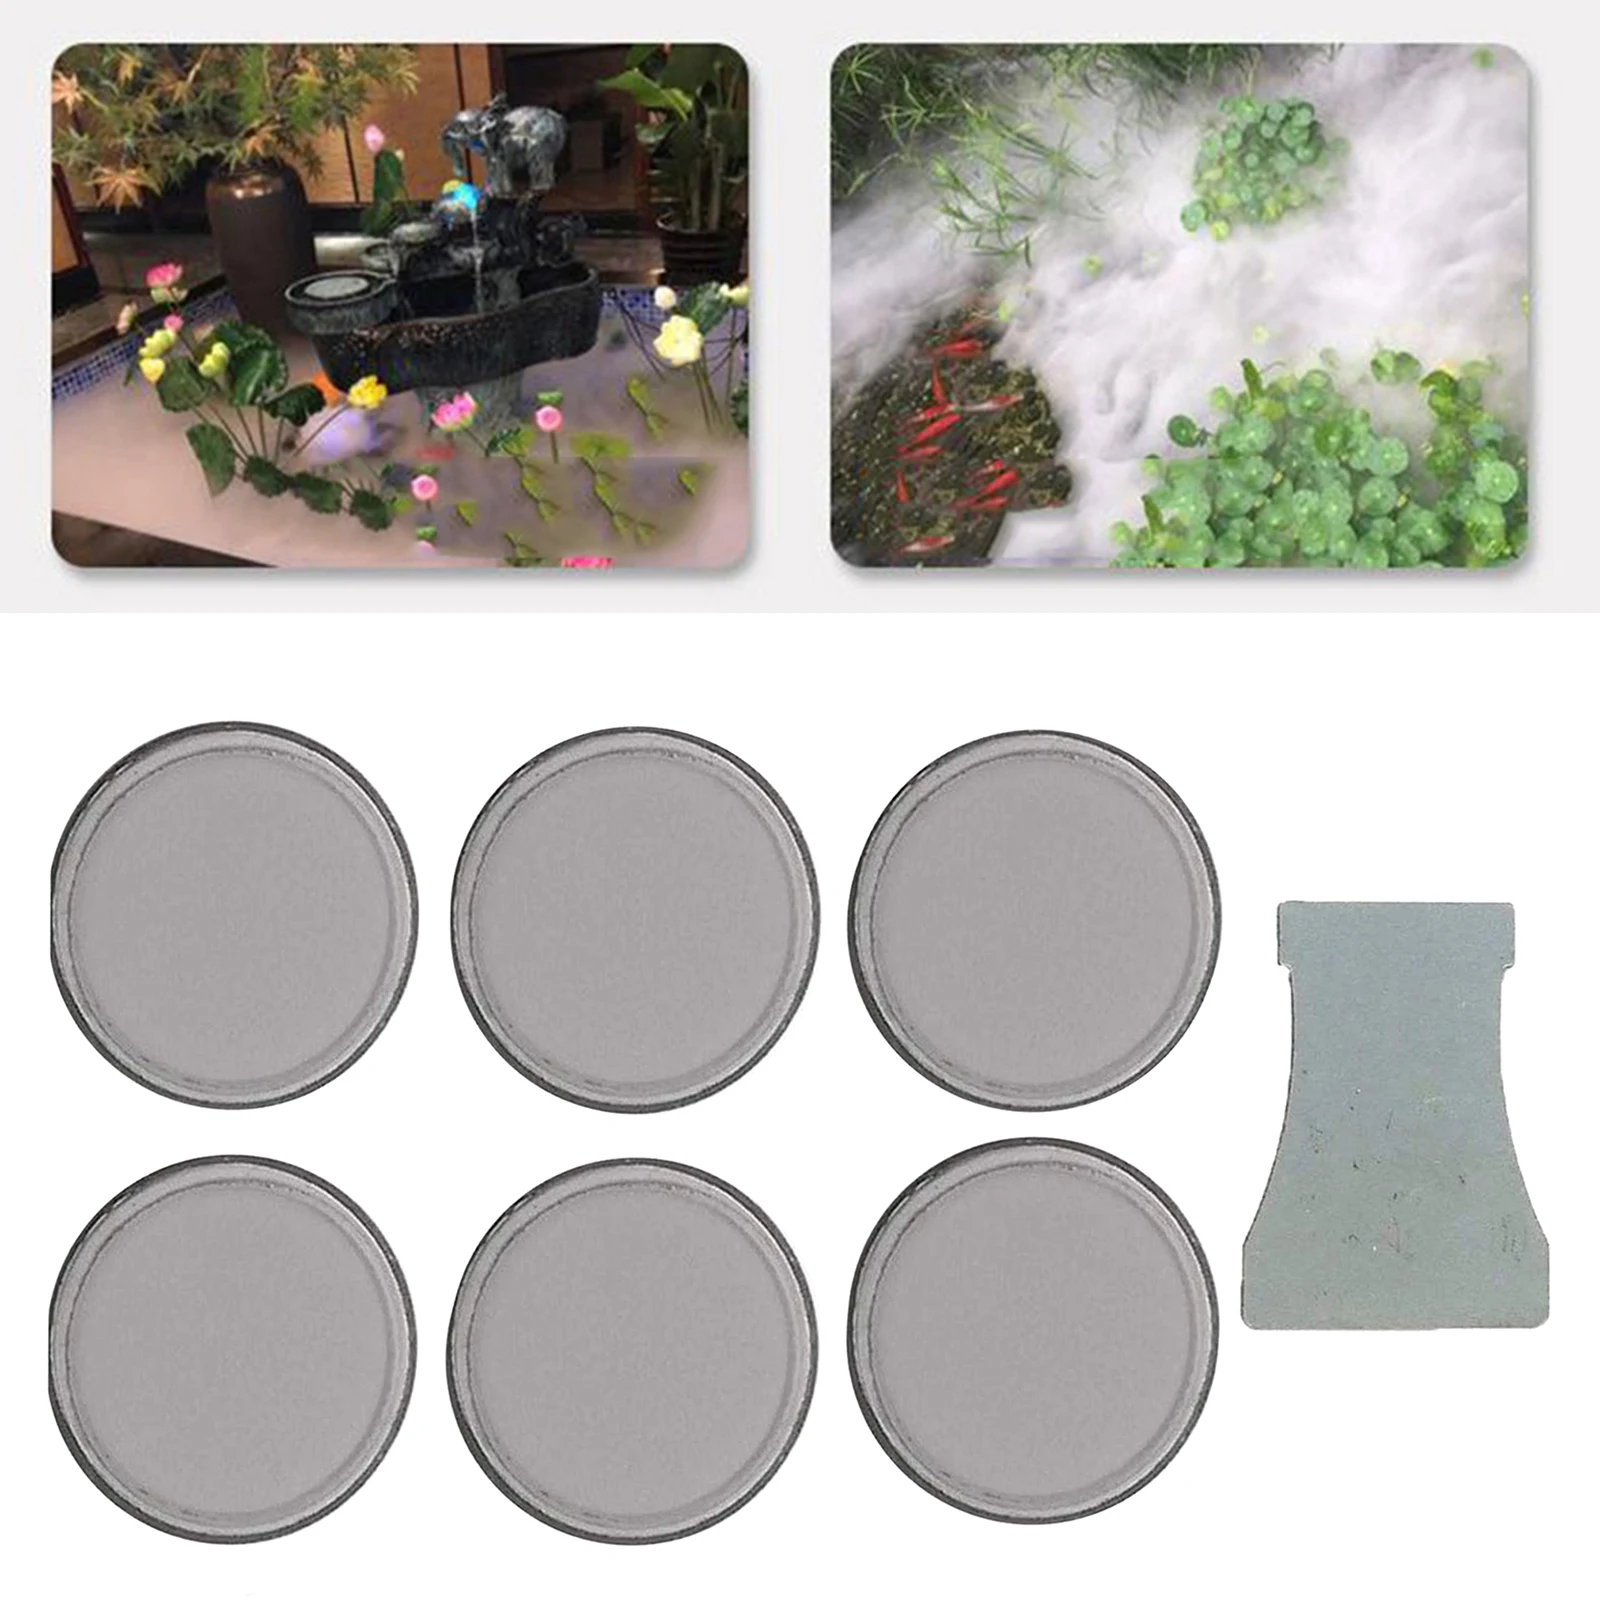 20mm Diameter Mist Maker Ceramics Discs Kit for Humidifier with Replacement Key 